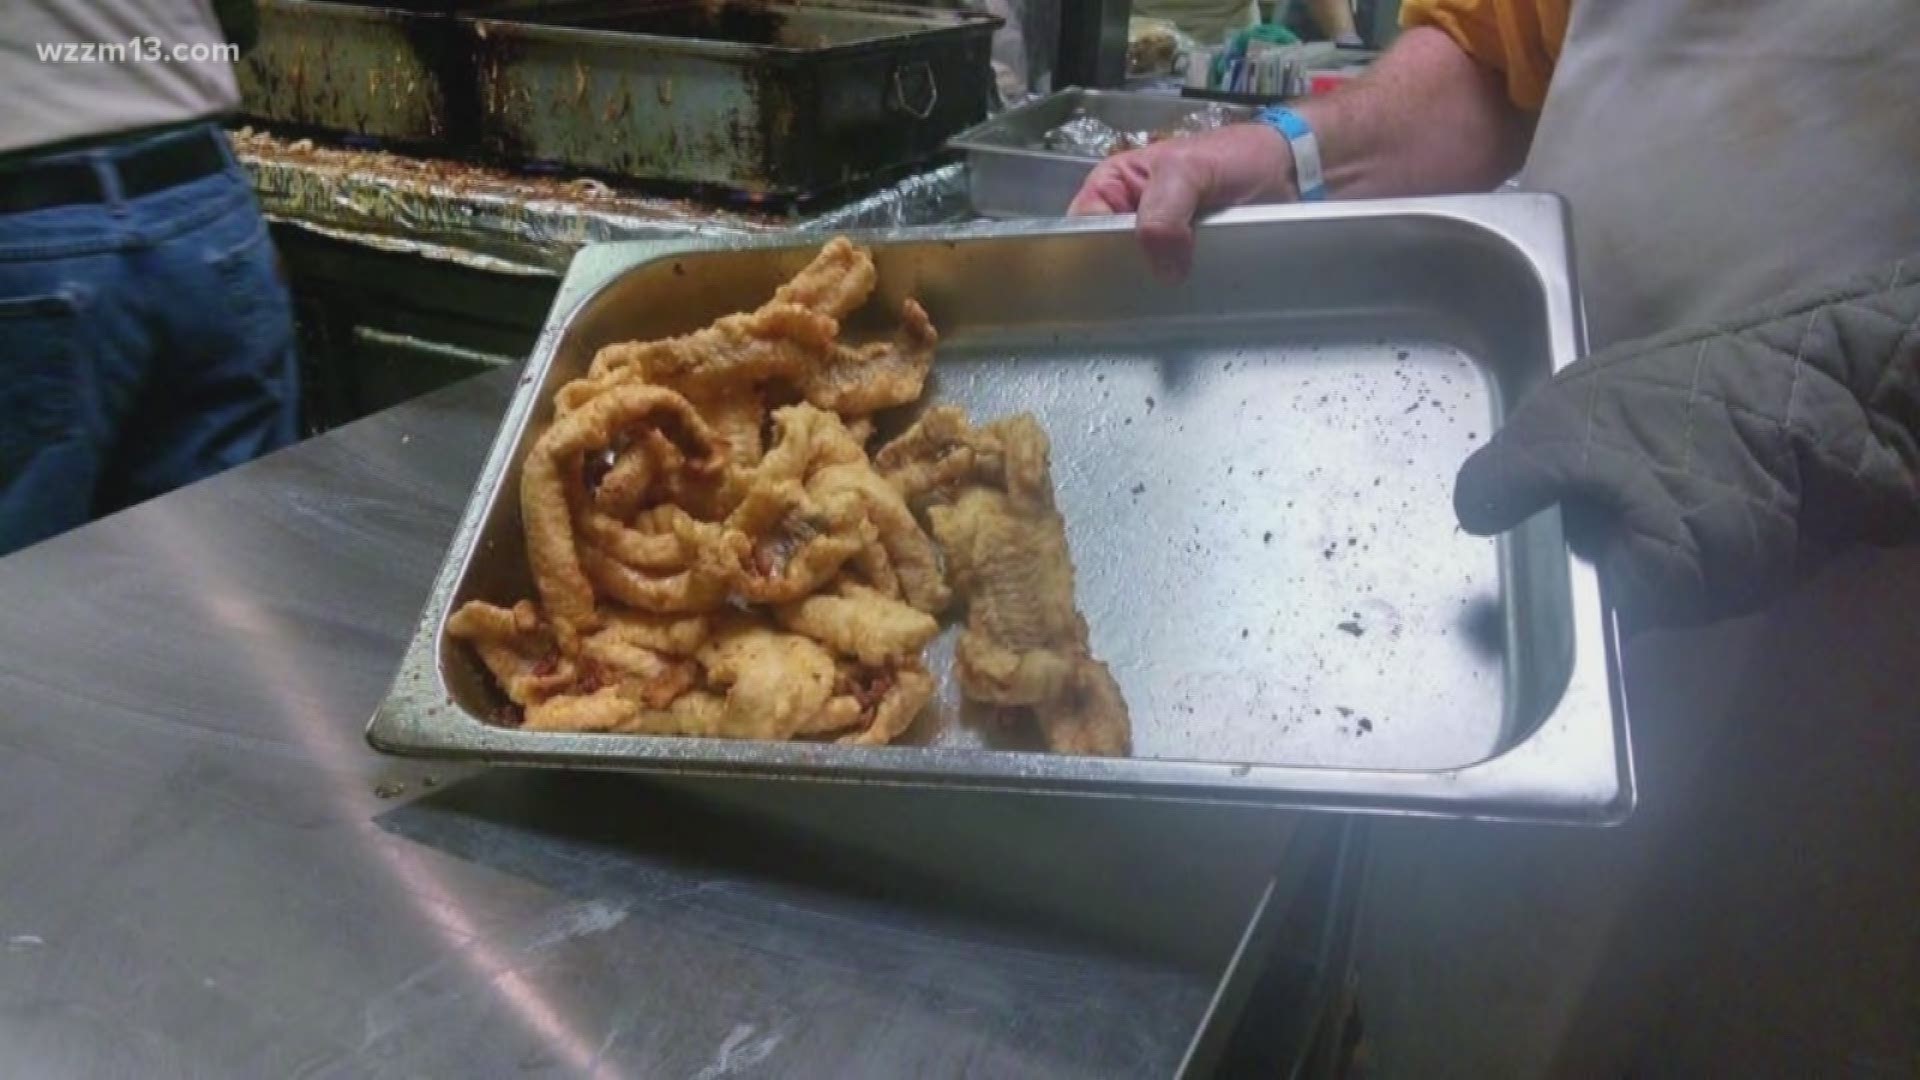 With Lent upon us, groups and organizations are embracing fish fry Fridays.